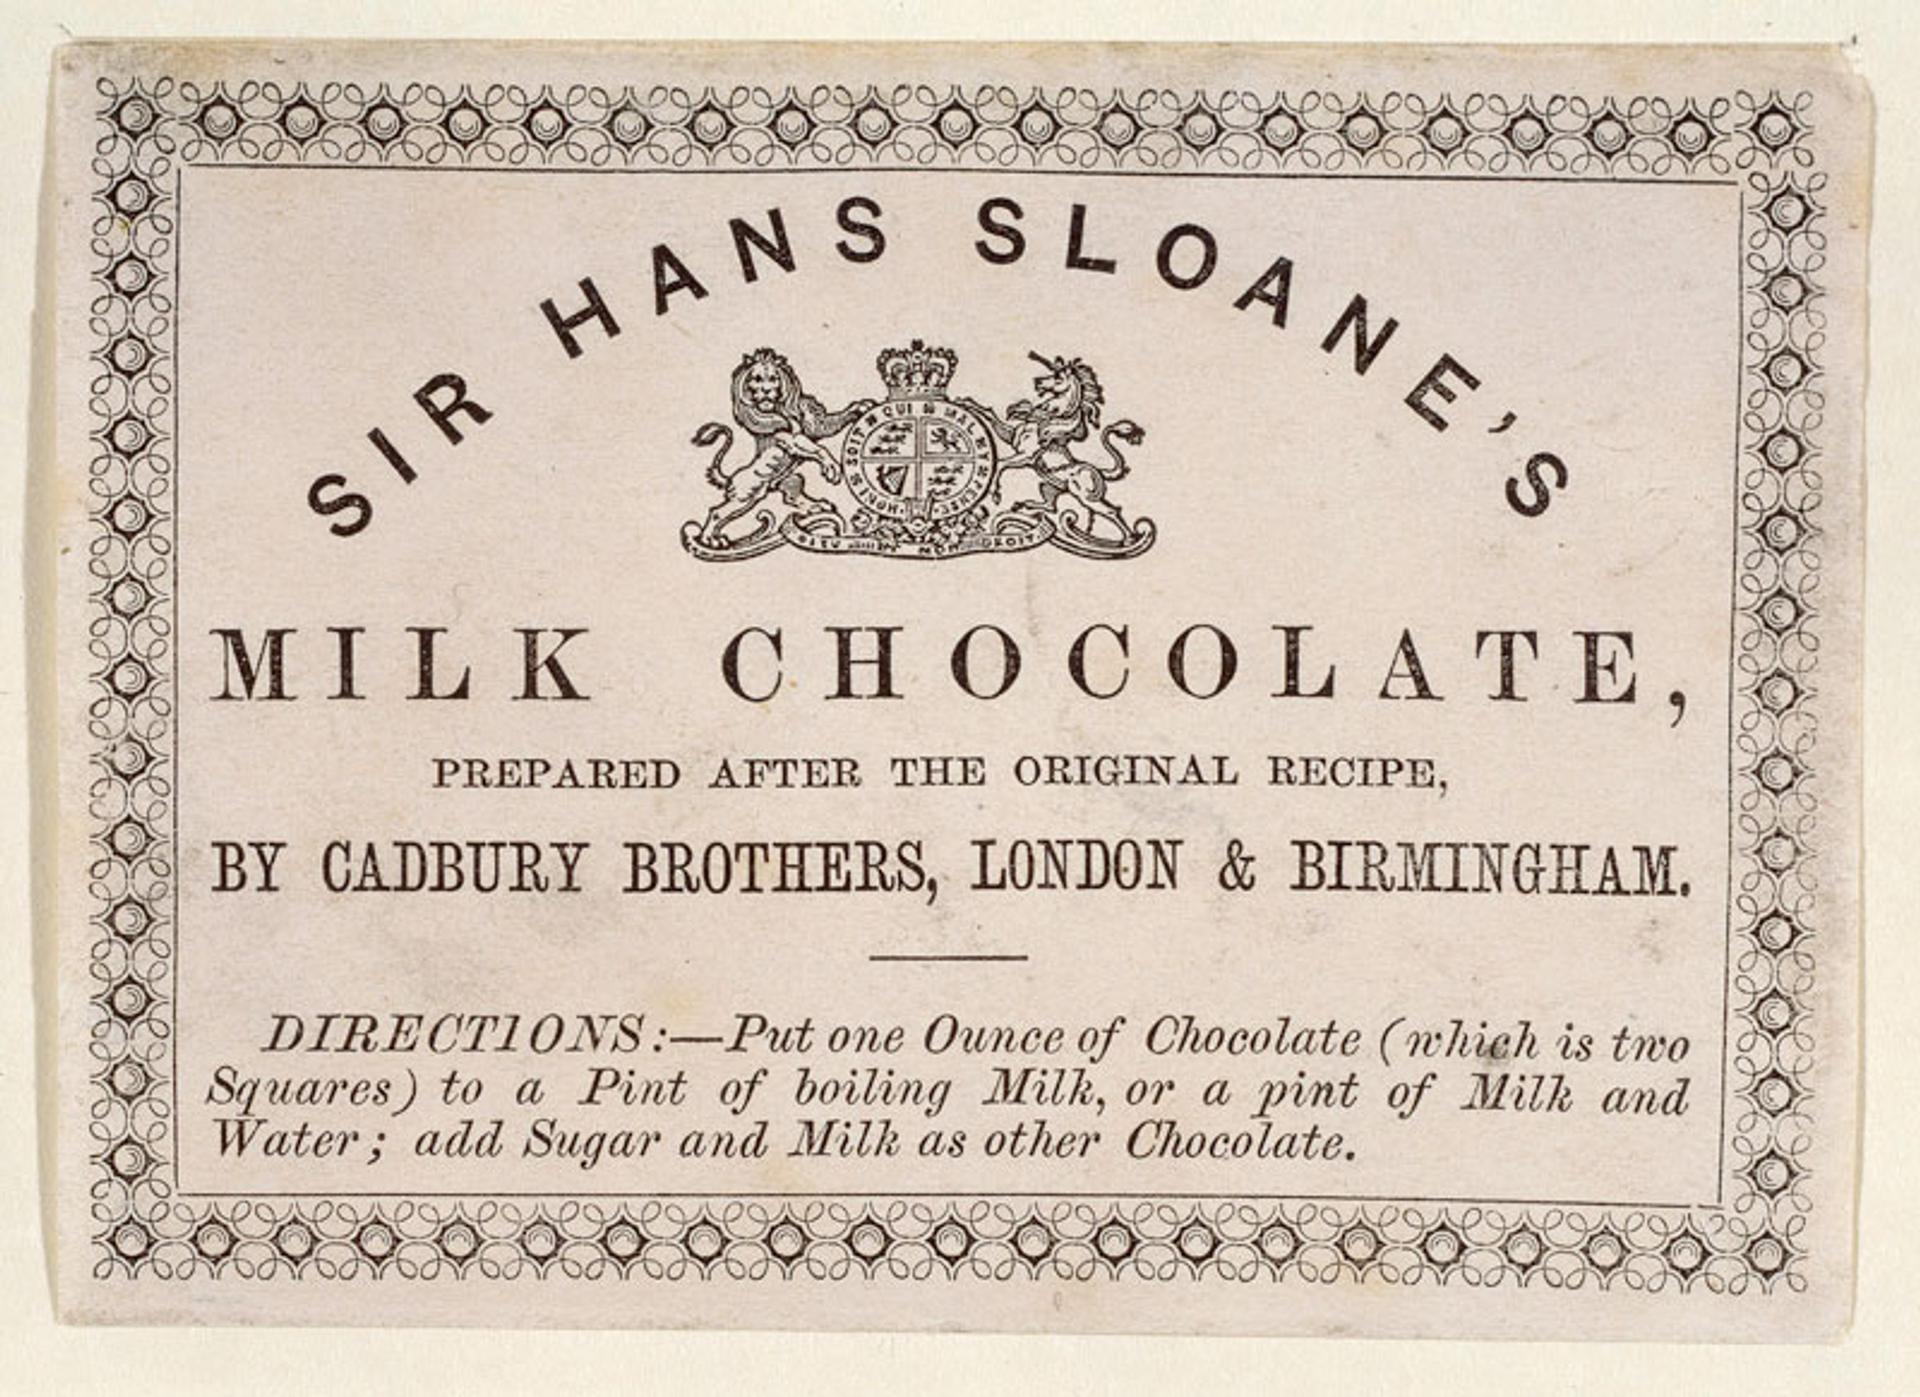 The ad says Sir Hans Sloane’s Milk Chocolate, prepared after the original recipe, by Cadbury Brothers, London and Birmingham.